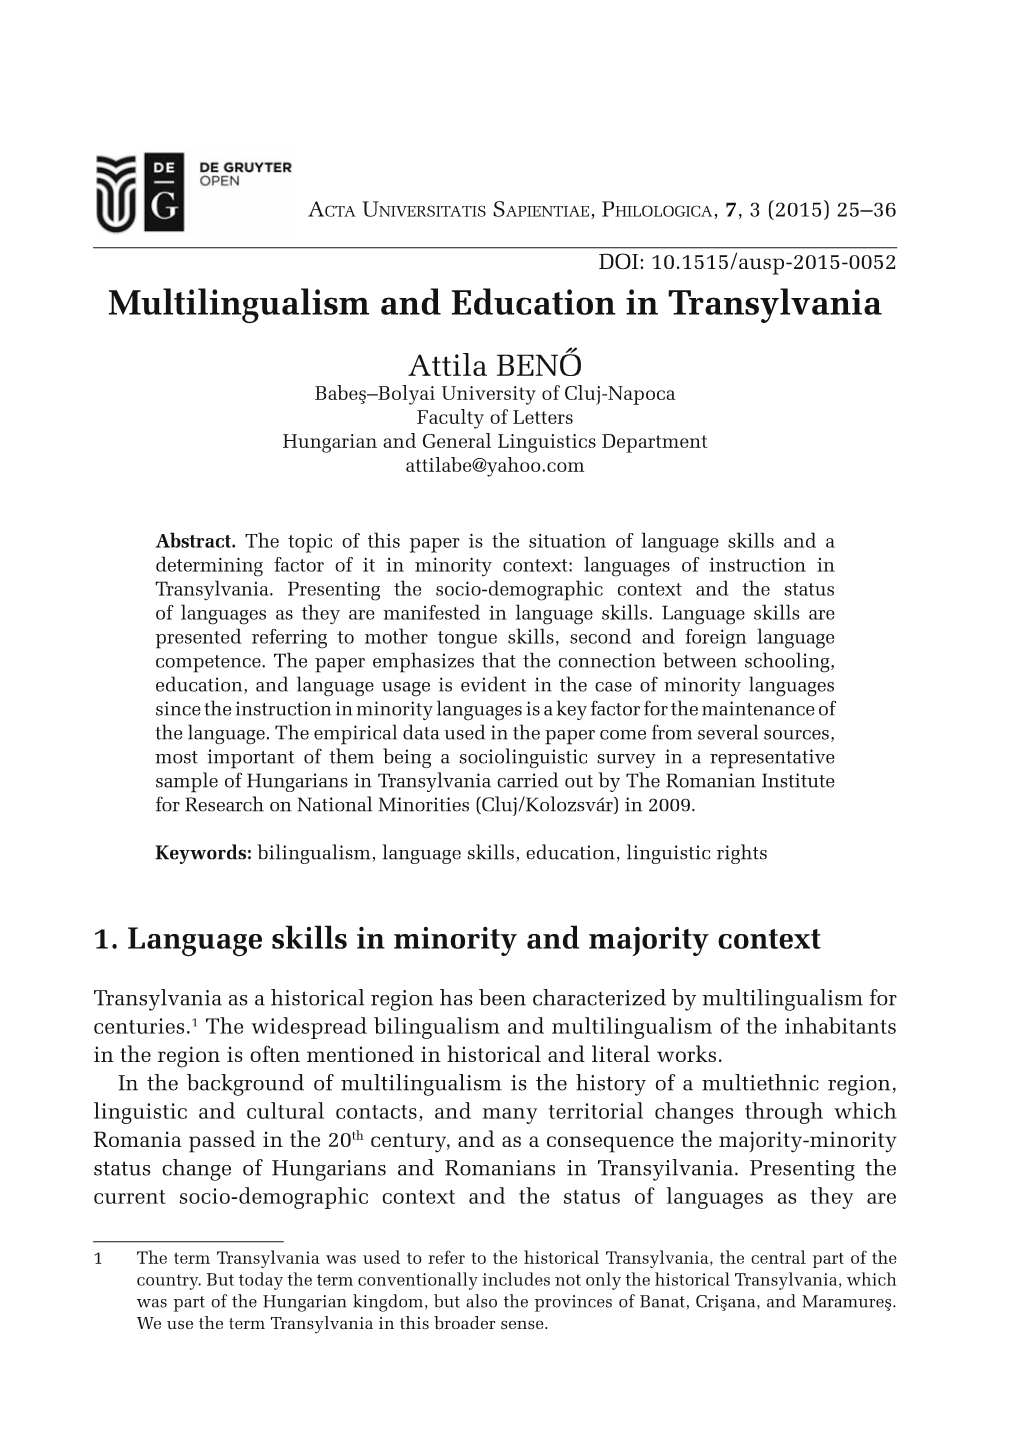 Multilingualism and Education in Transylvania